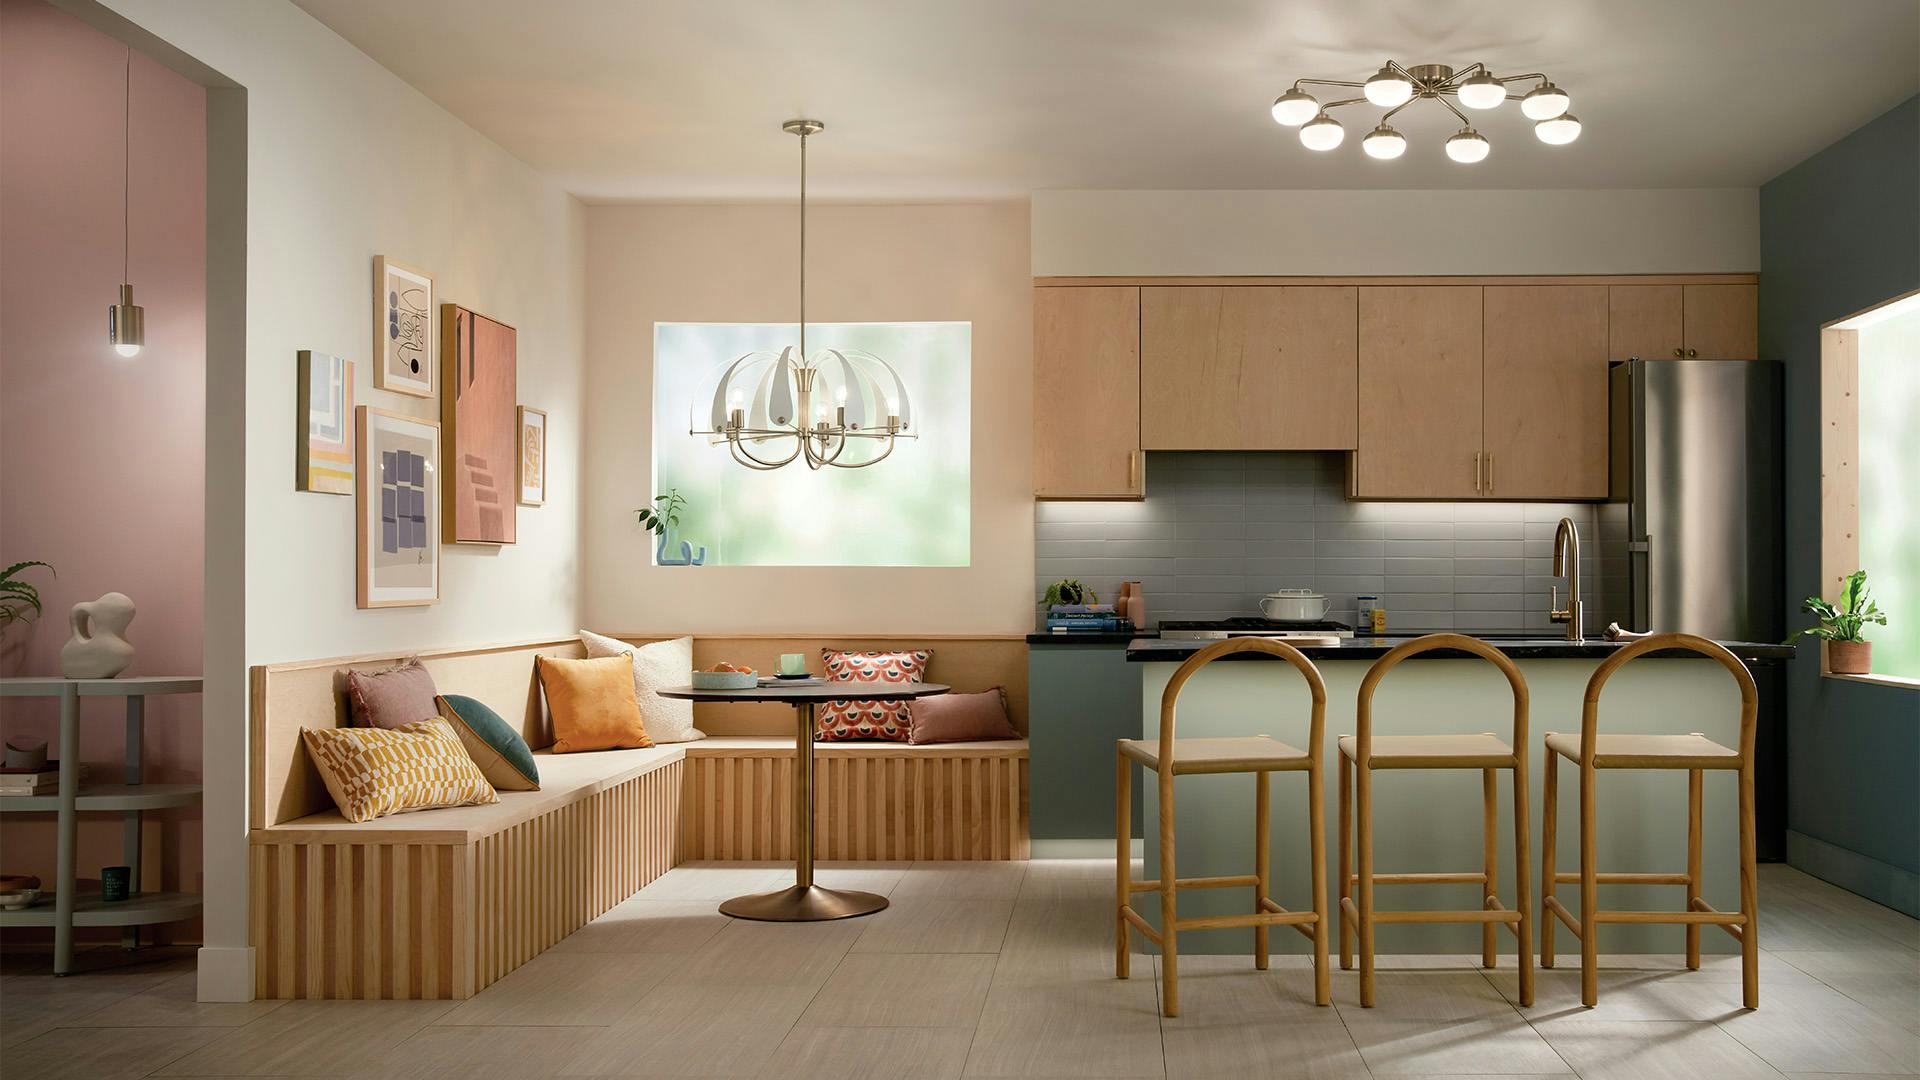 Kitchen with Remy ceiling light in champagne bronze.